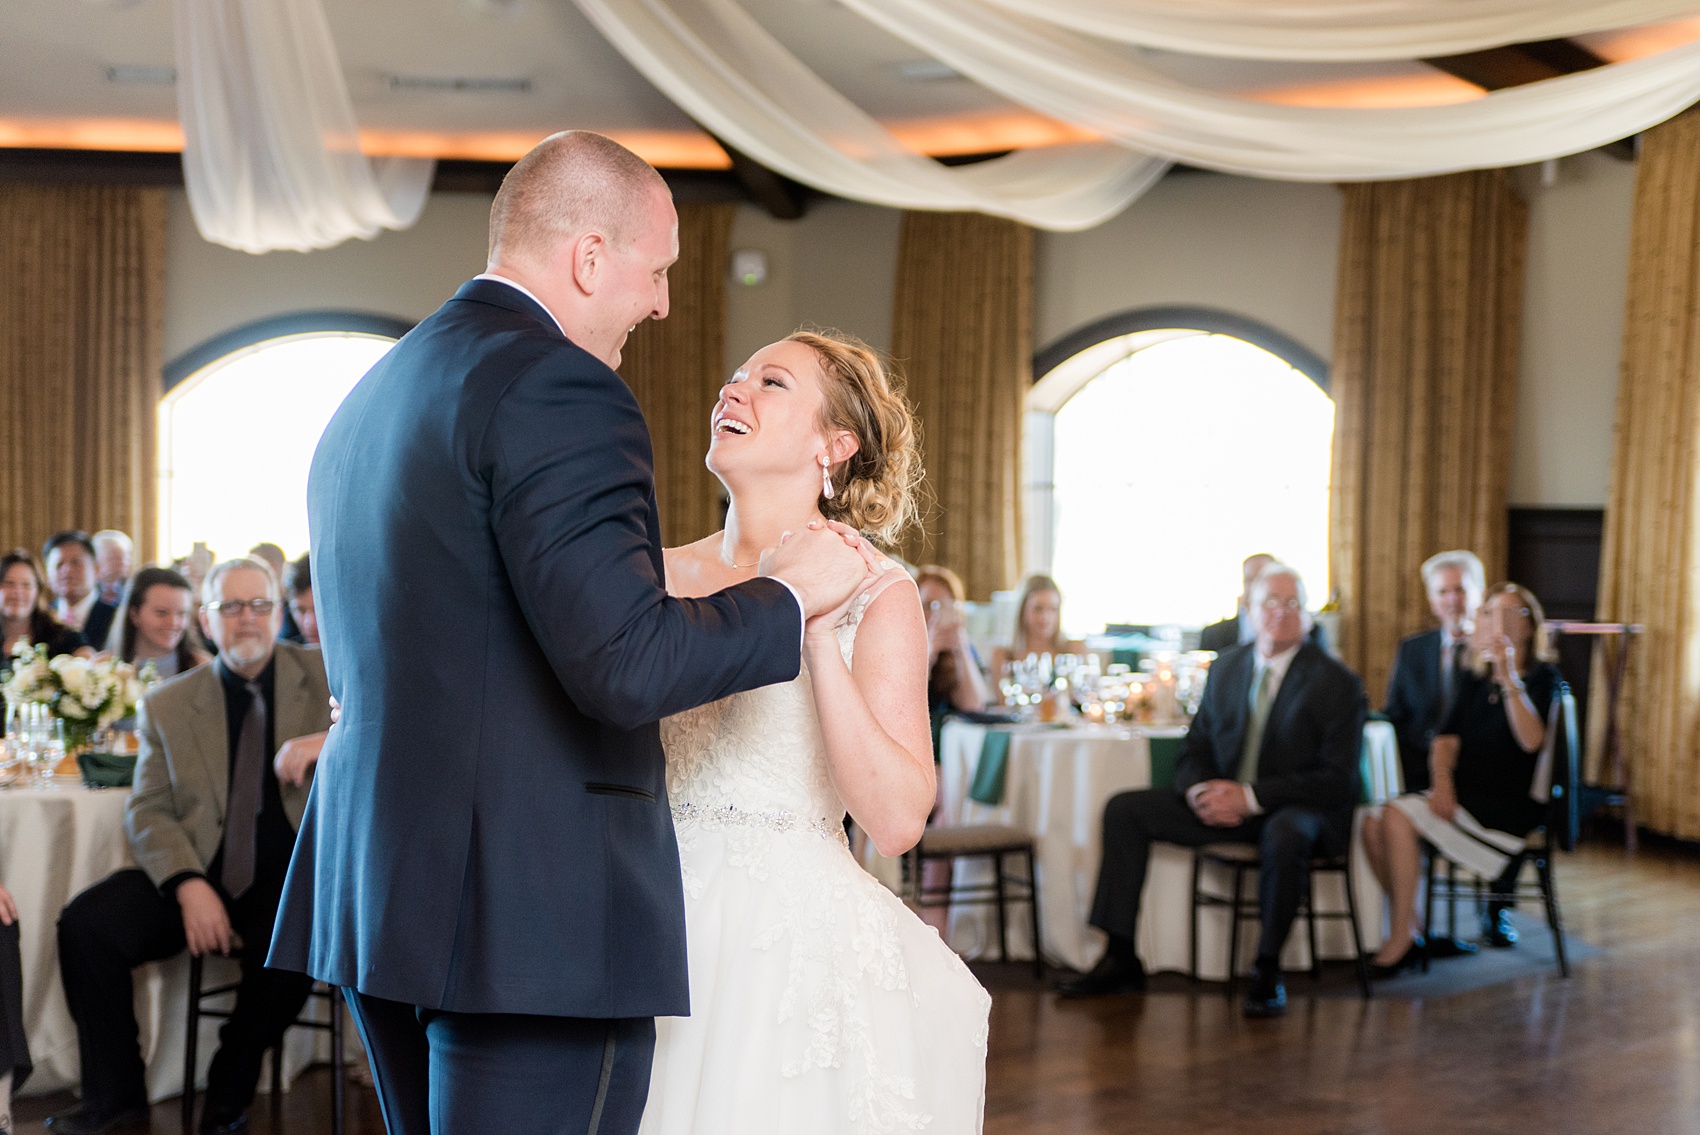 Saratoga Springs destination wedding photos by Mikkel Paige Photography. The spring event was held at Saratoga National Golf Club venue. The bride and groom shared a first dance moment. #SaratogaSpringsNY #SaratogaSprings #mikkelpaige #NYwedding #destinationwedding #saratogaweddingvenue #golfcoursewedding #firstdance #springwedding